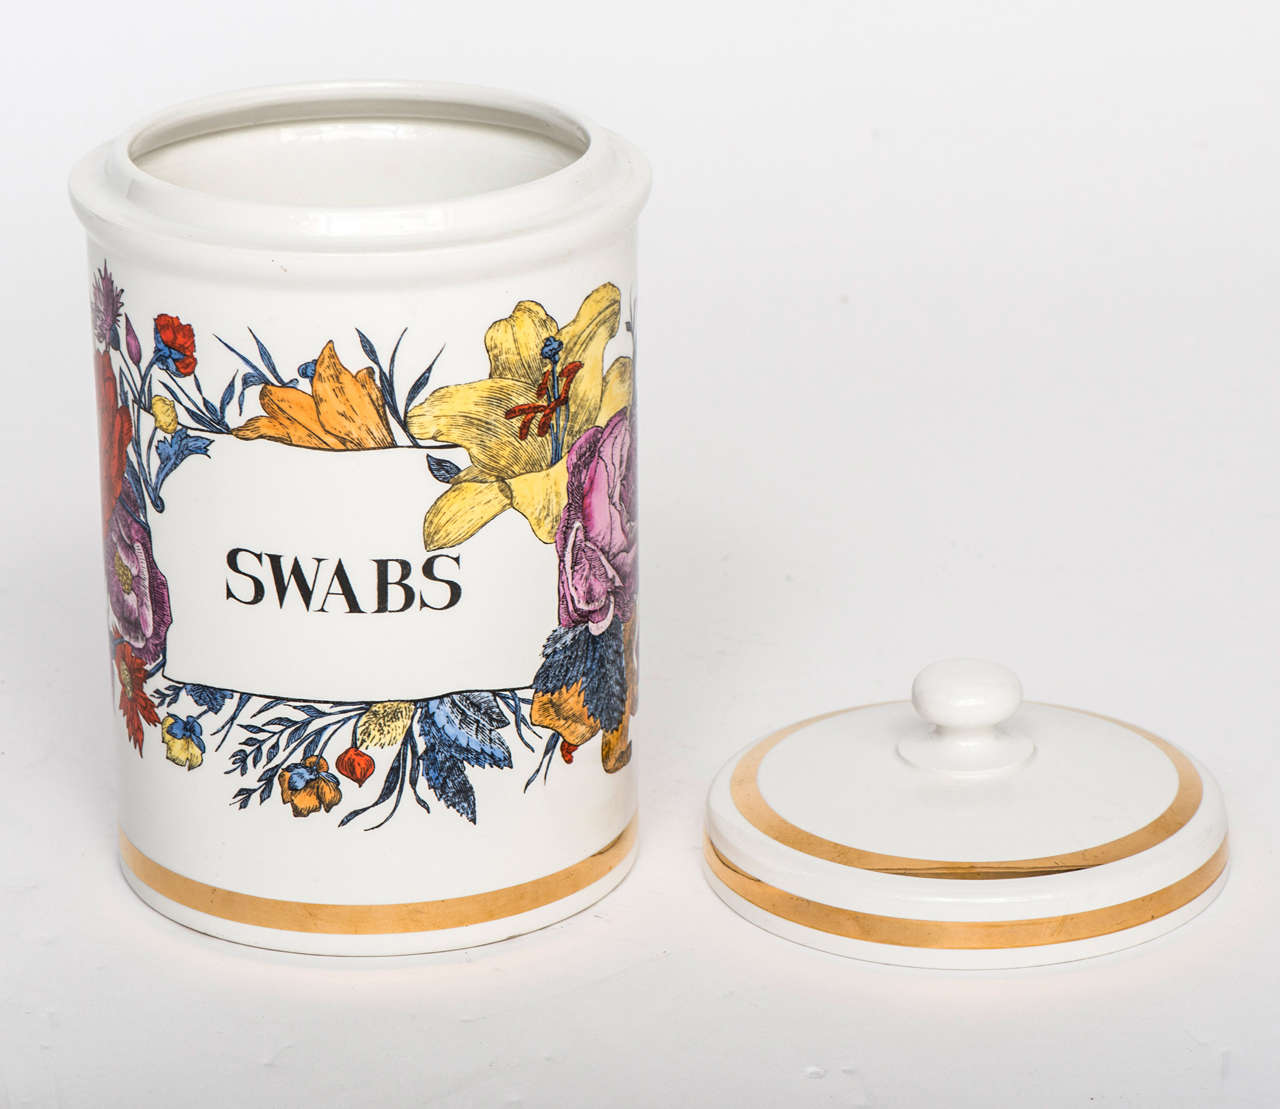 A Porcelain “Swabs” Jar and Cover by Piero Fornasetti.
Labelled against decorative Flora.
Lithographically printed and hand coloured.
Gilt highlights
Label to base
Italy
Circa 1960
30cmsh x 18cms diam